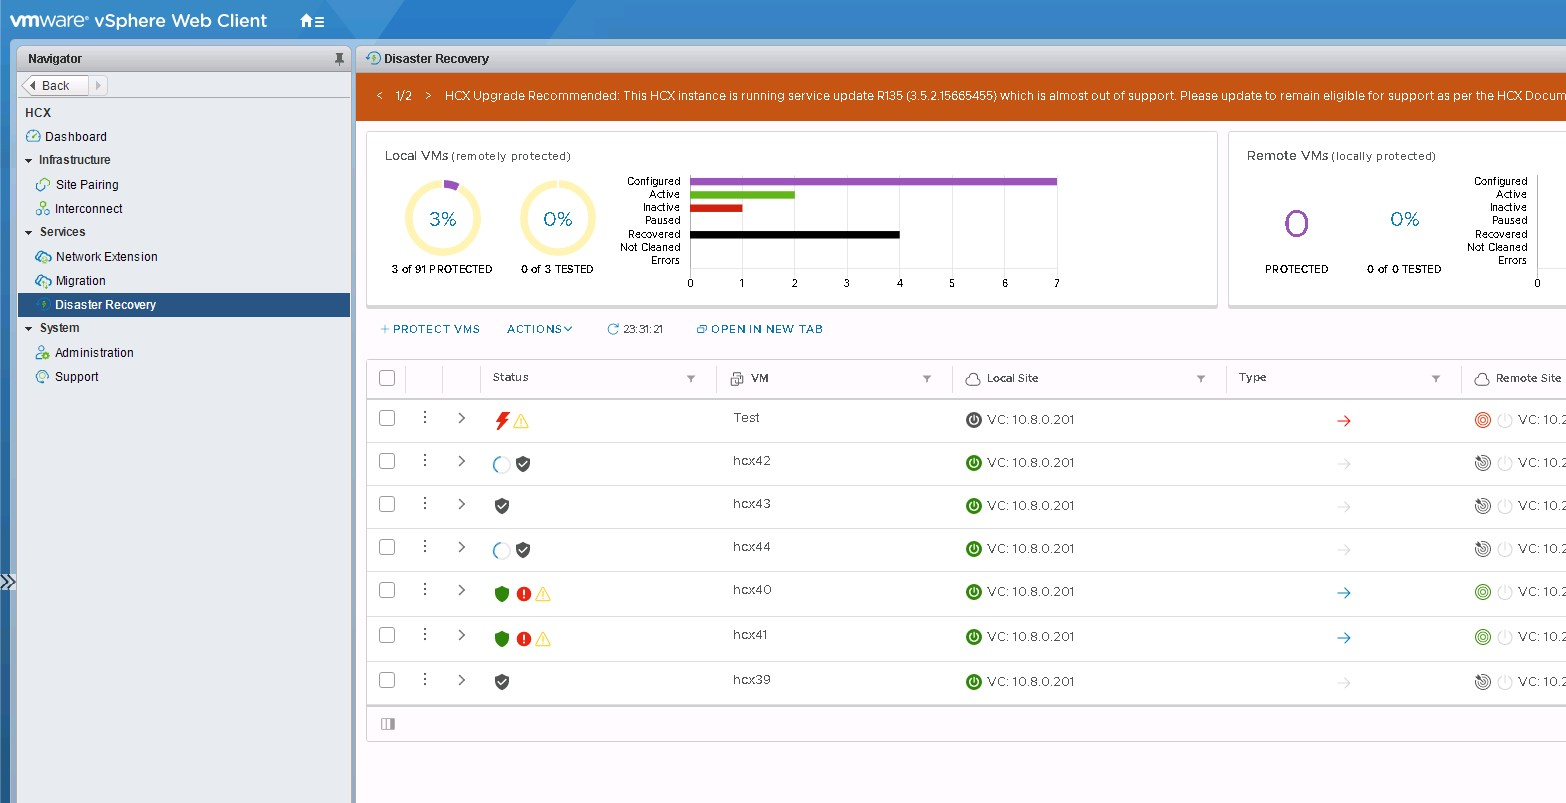 Screenshot shows the Disaster Recovery dashboard in the vSphere Client.